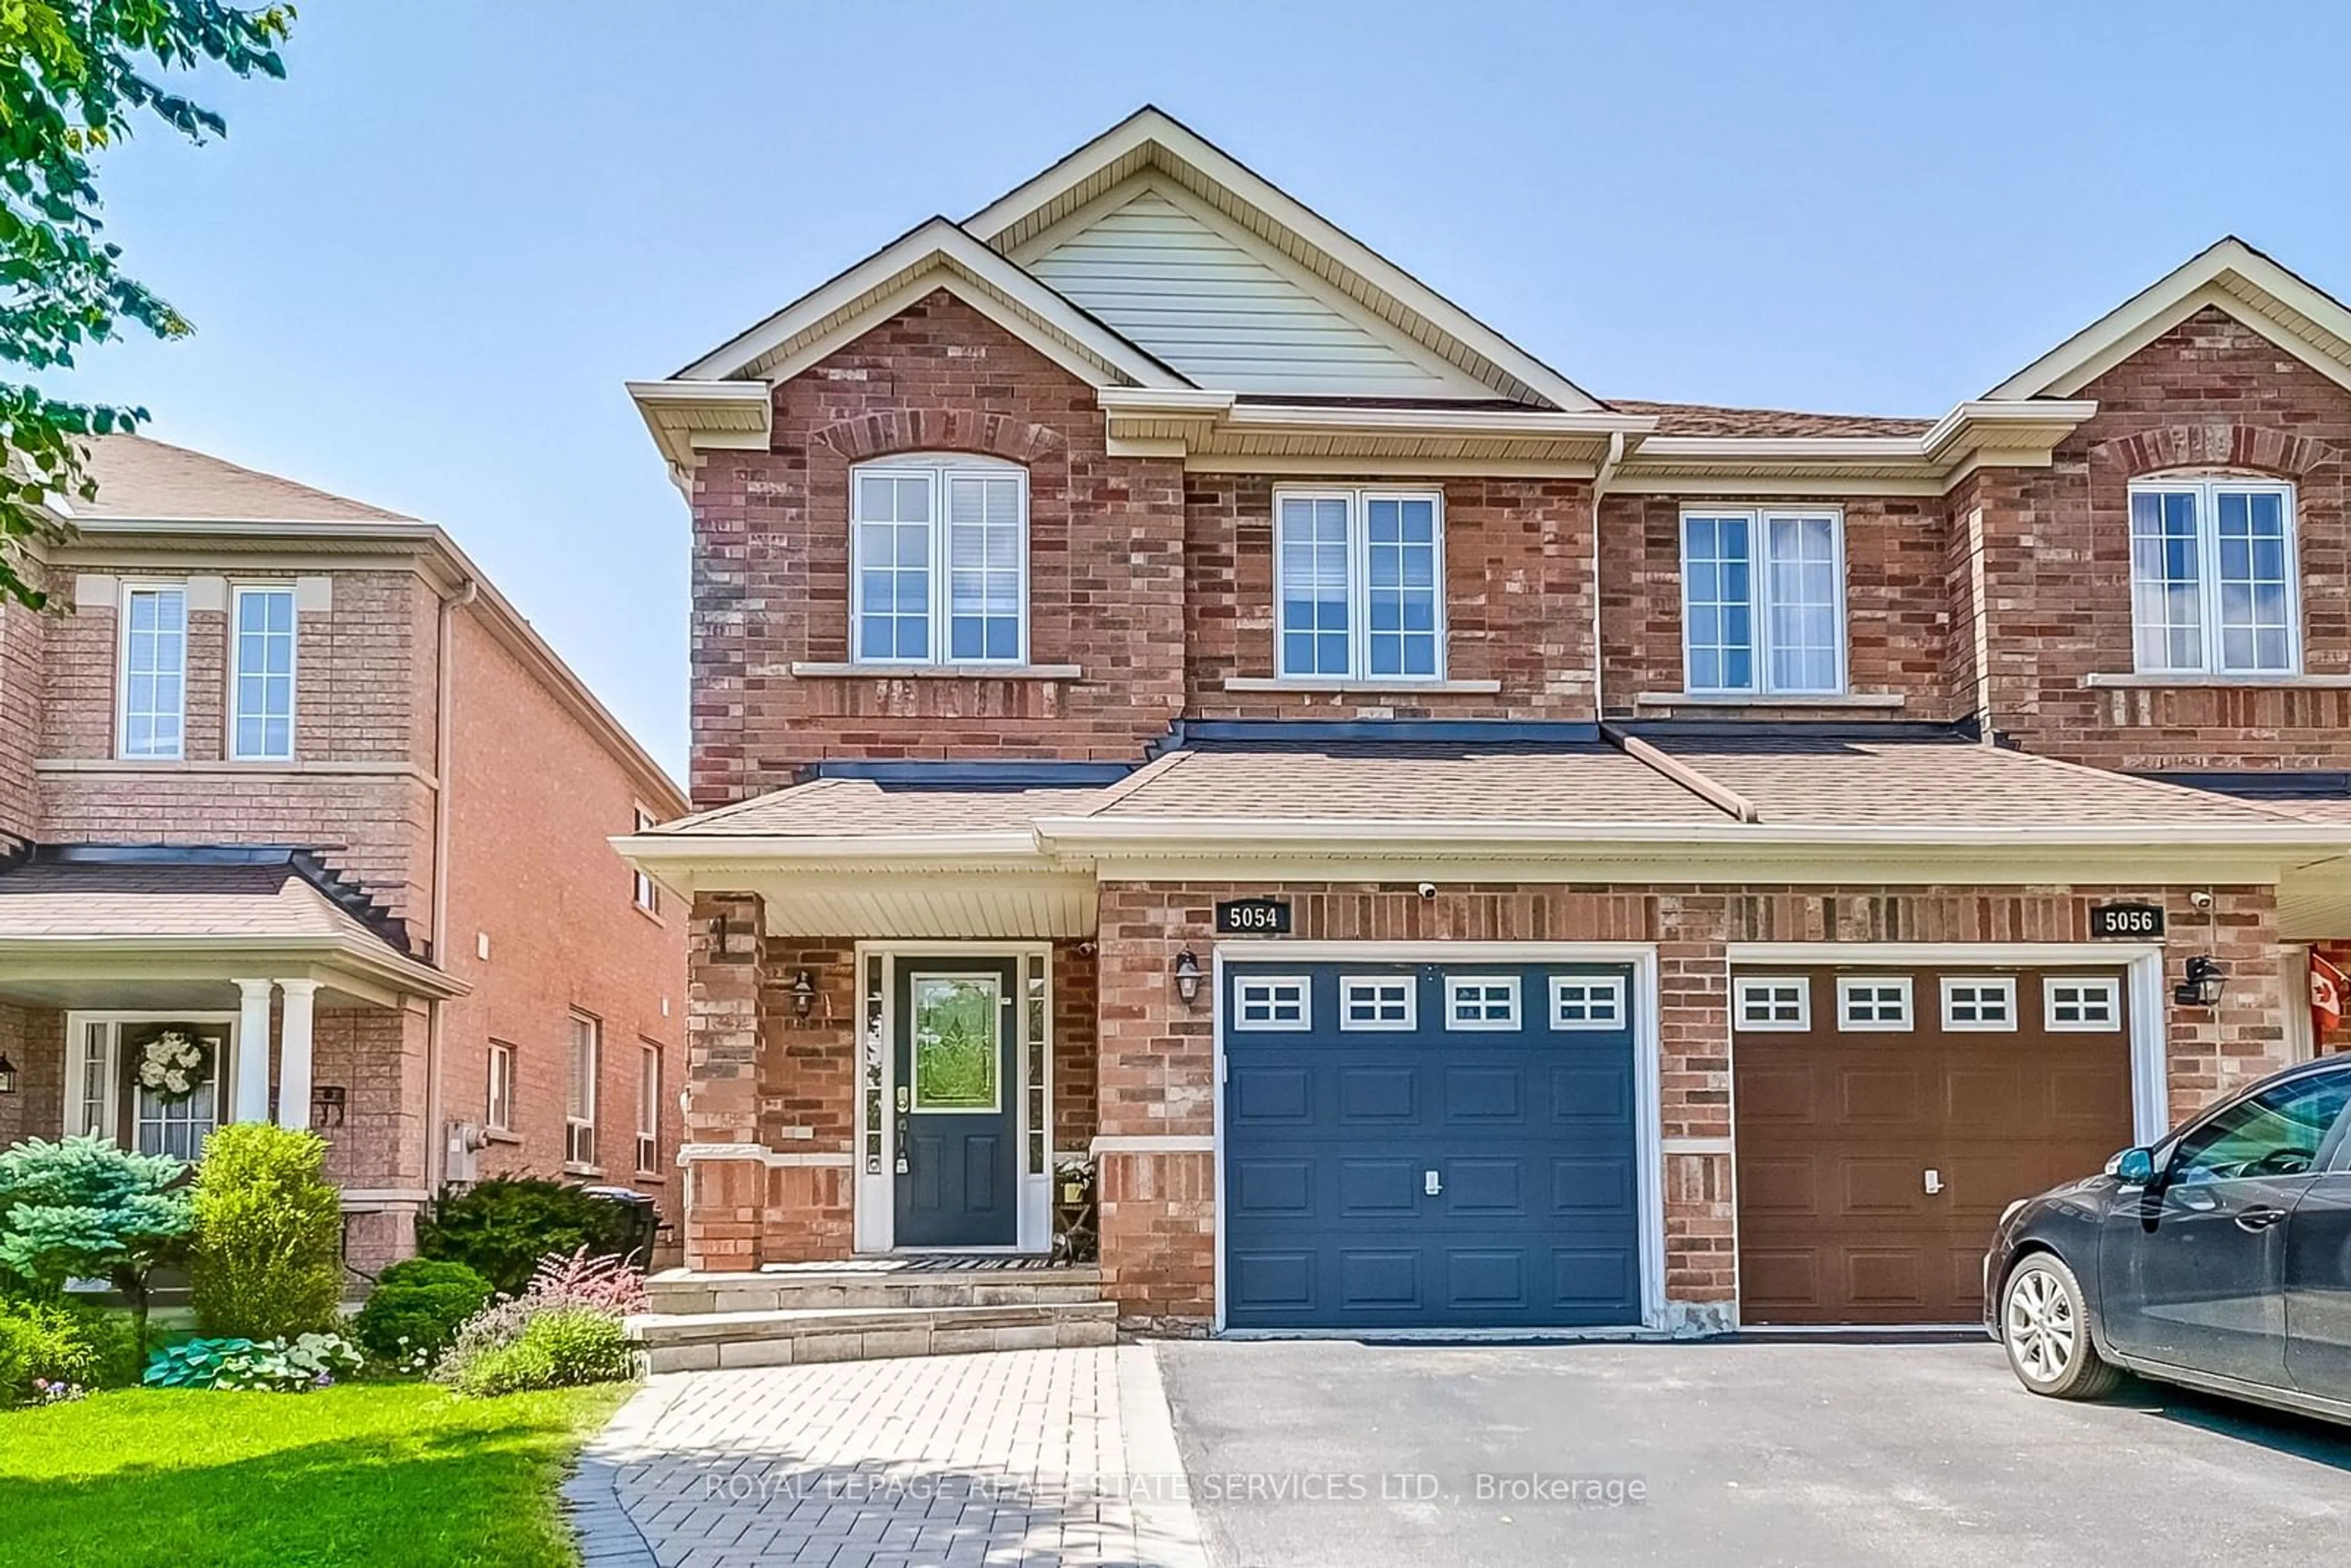 Home with brick exterior material for 5054 Preservation Circ, Mississauga Ontario L5M 7T5